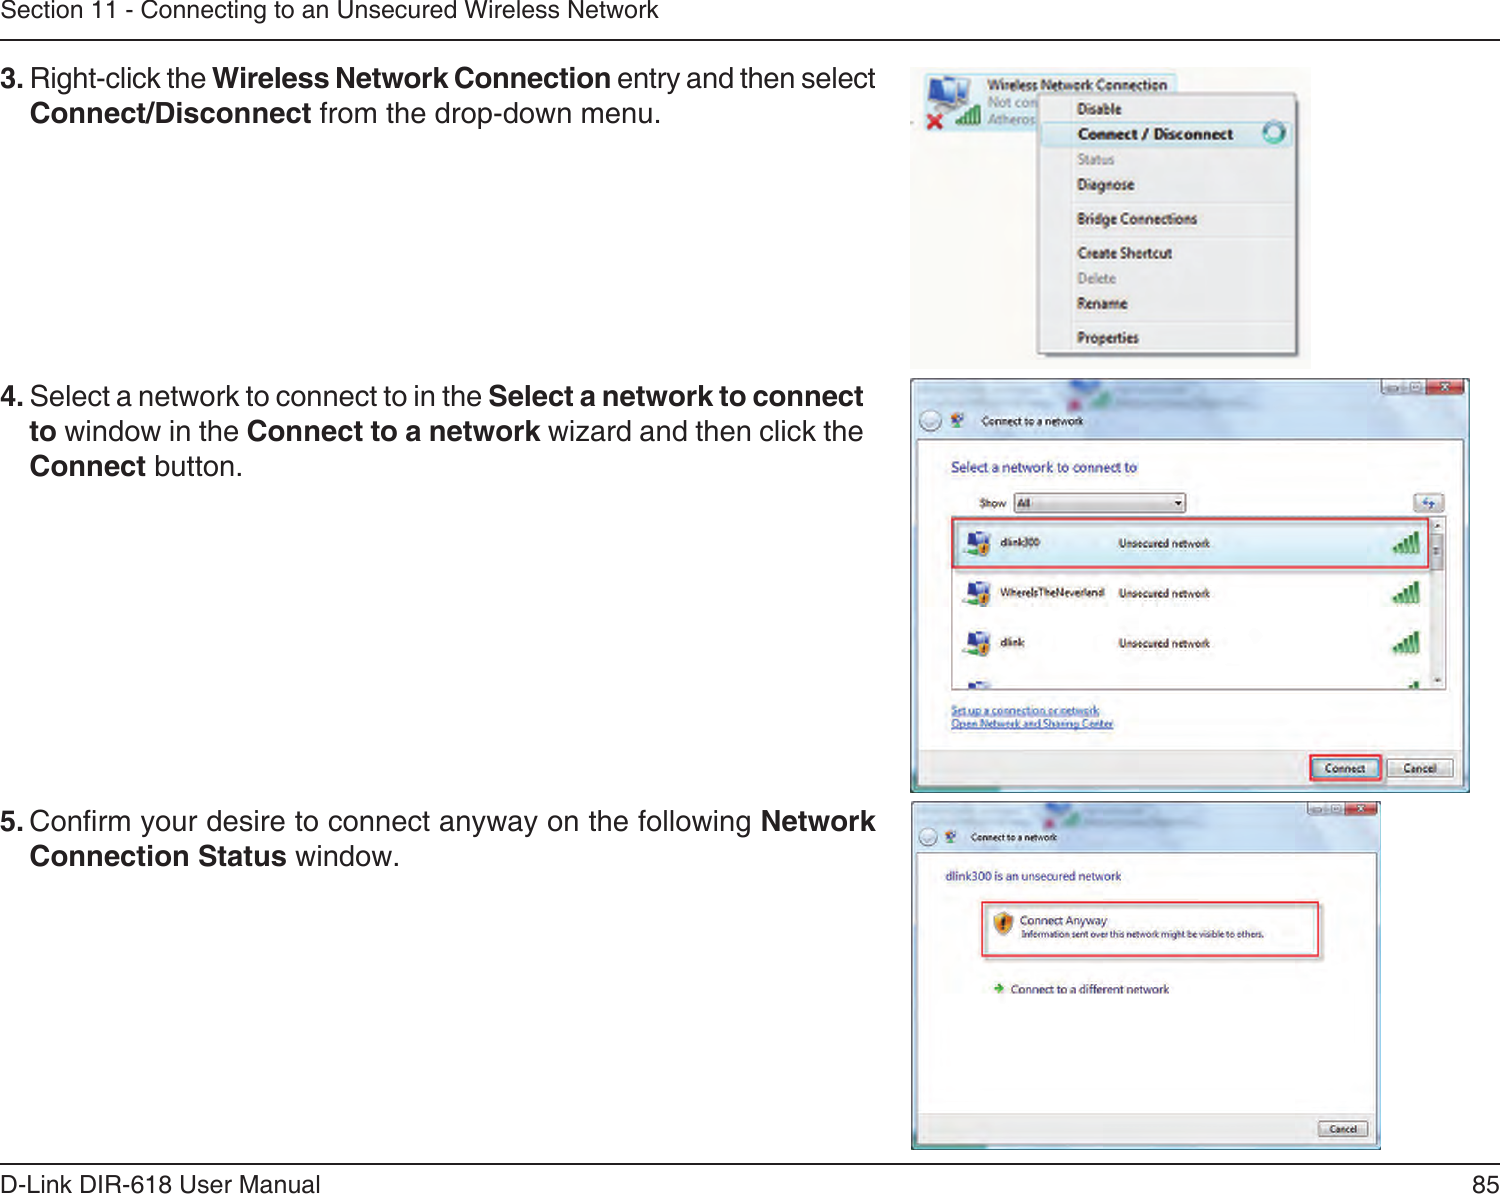 85D-Link DIR-618 User ManualSection 11 - Connecting to an Unsecured Wireless Network3. Right-click the Wireless Network Connection entry and then selectConnect/Disconnect from the drop-down menu. 4. Select a network to connect to in the Select a network to connectto window in the Connect to a network wizard and then click theConnect button. 5. Conrm your desire to connect anyway on the following Network Connection Status window.  